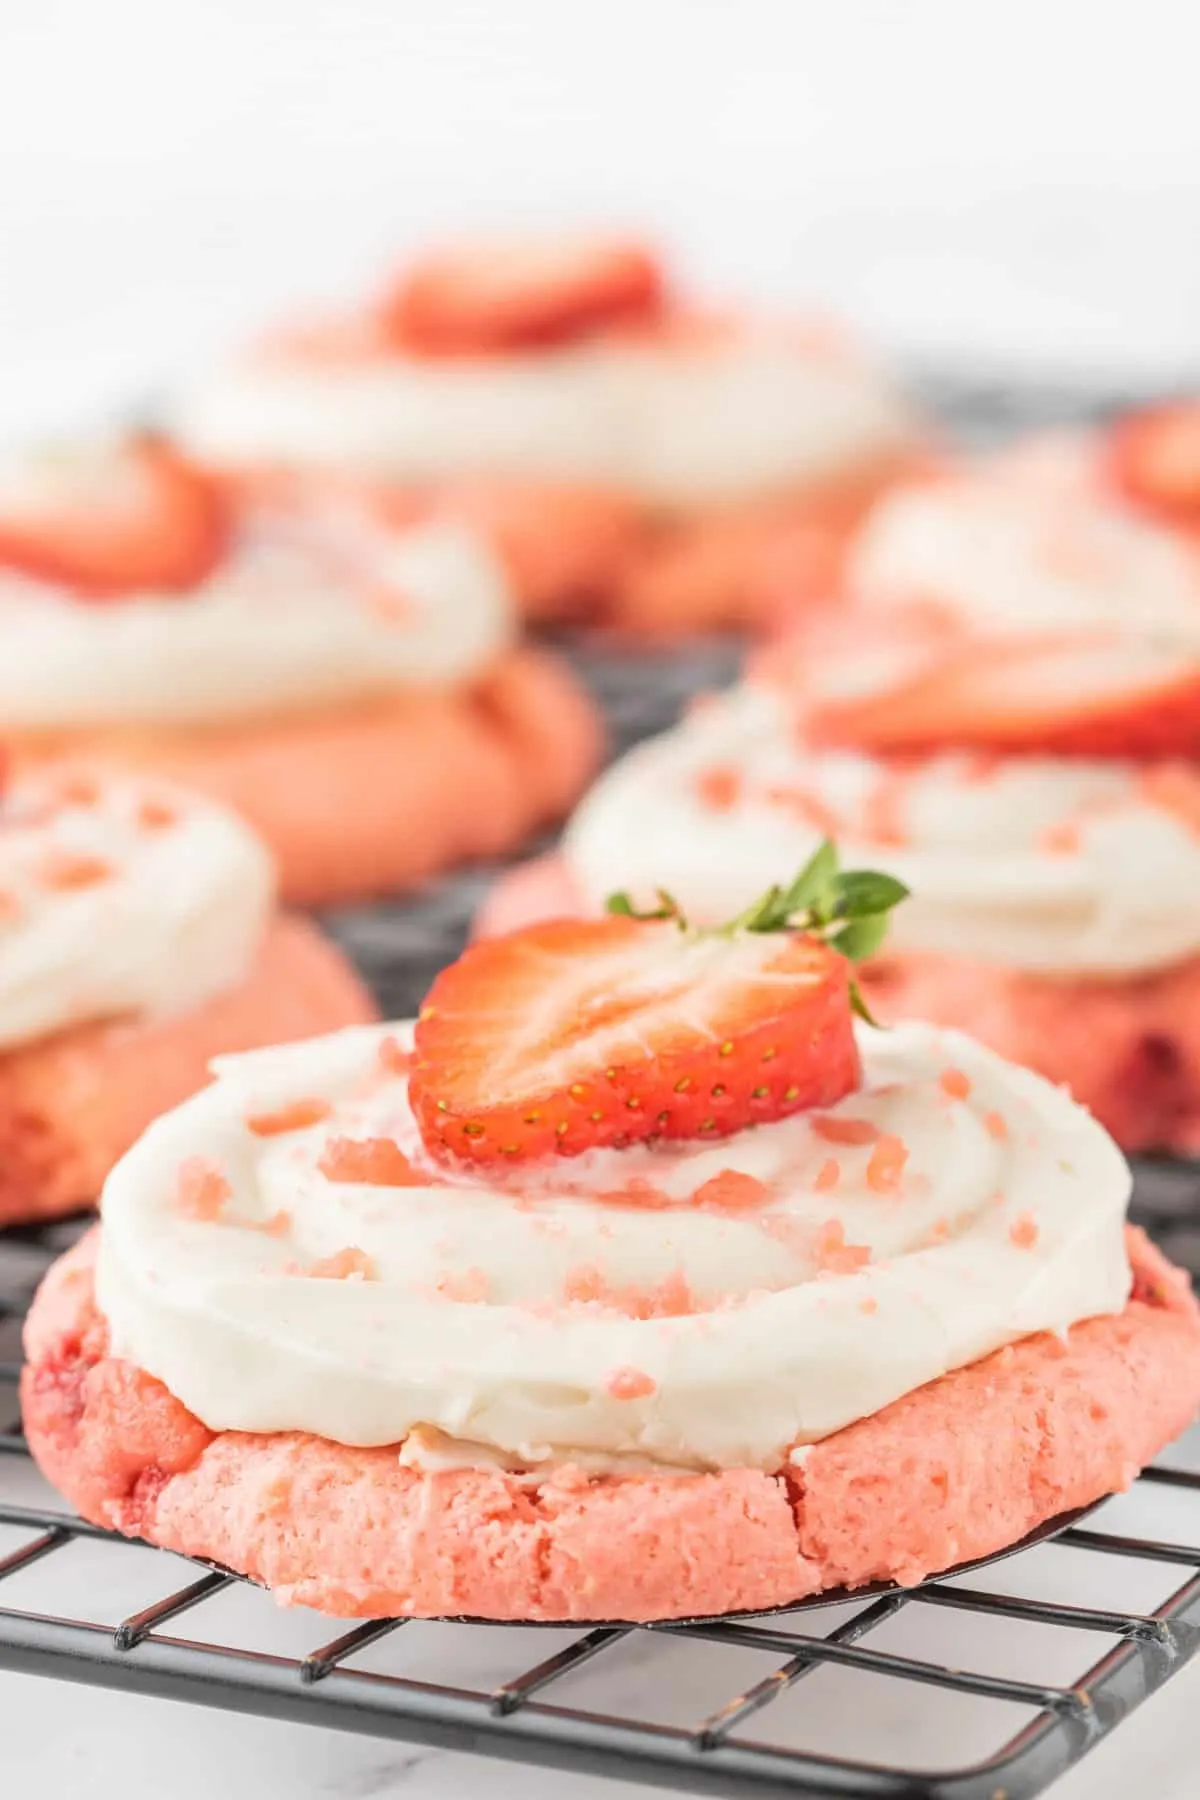 Strawberry Cheesecake Cookies are simple and delicious cookies made with boxed strawberry cake mix and fresh chopped strawberries, topped with a homemade cream cheese frosting.